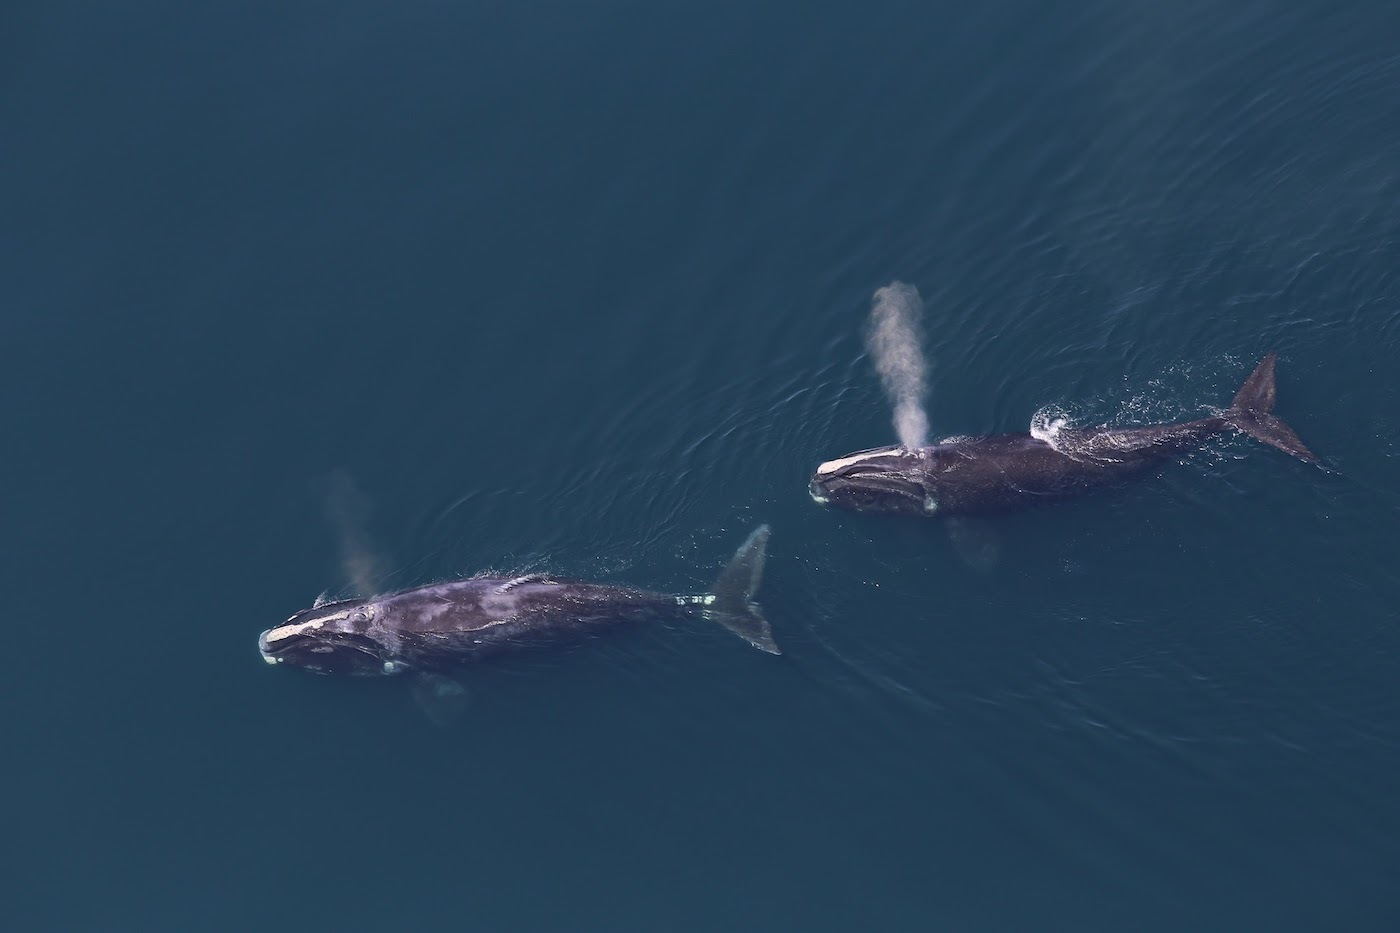 Aerial view of two large black whales swimming one behind the other, along a smooth teal ocean surface, with plumes of breath visible.